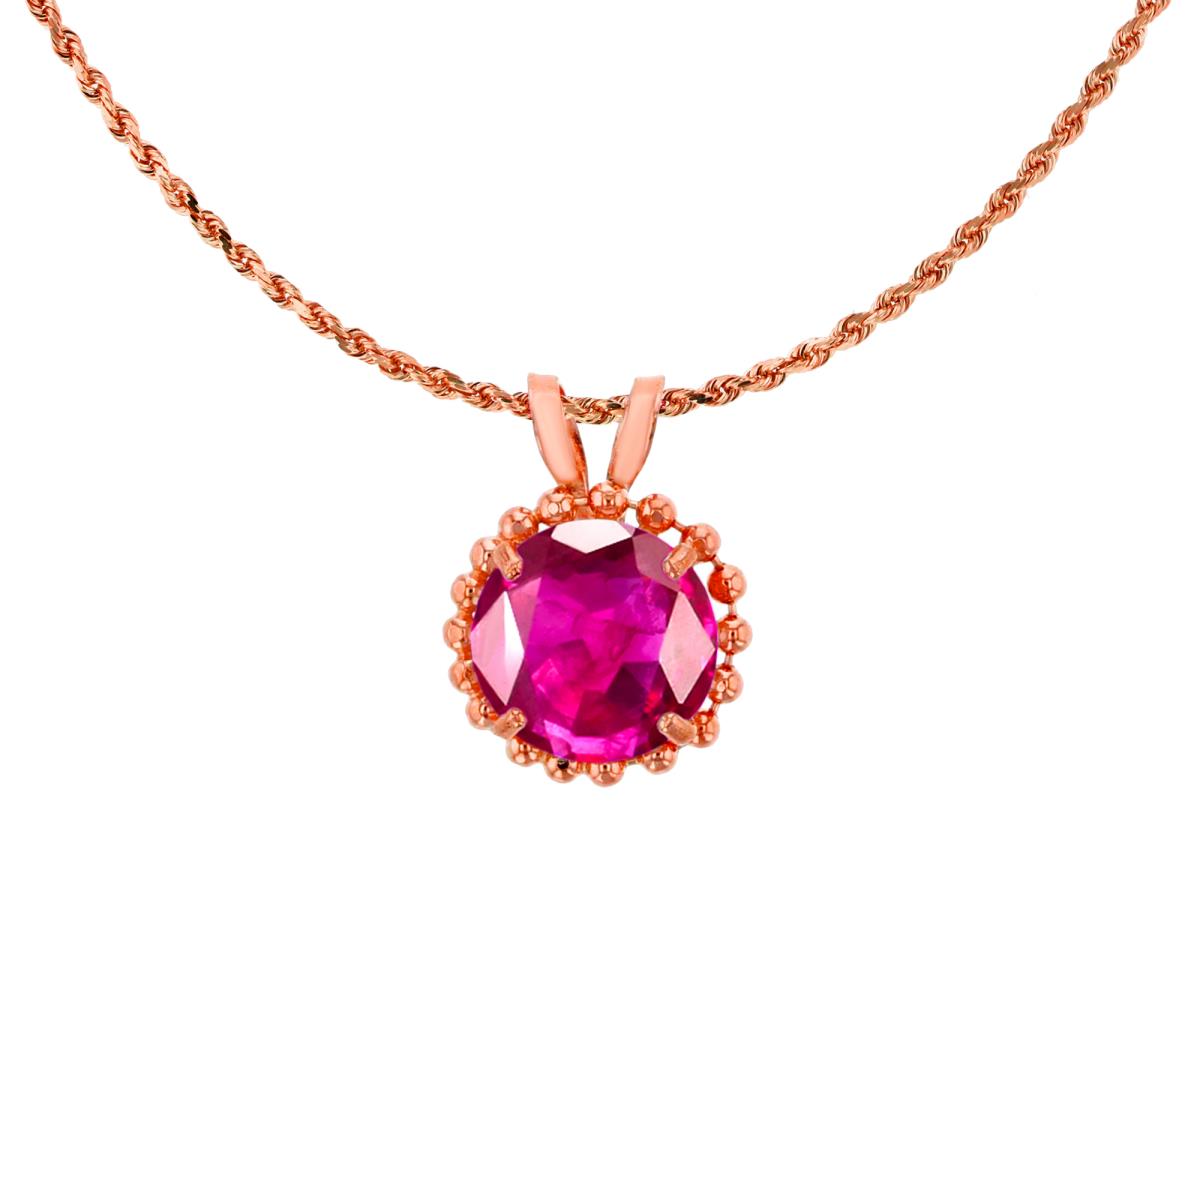 10K Rose Gold 6mm Rd Cut Glass Filled Ruby with Bead Frame Rabbit Ear 18" Necklace